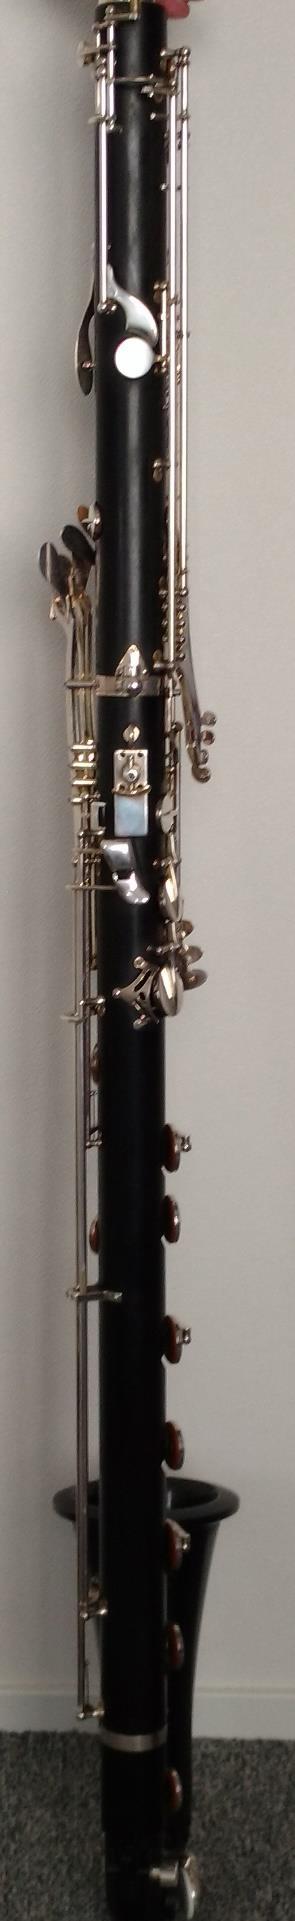 The keys on the back of a Selmer Paris